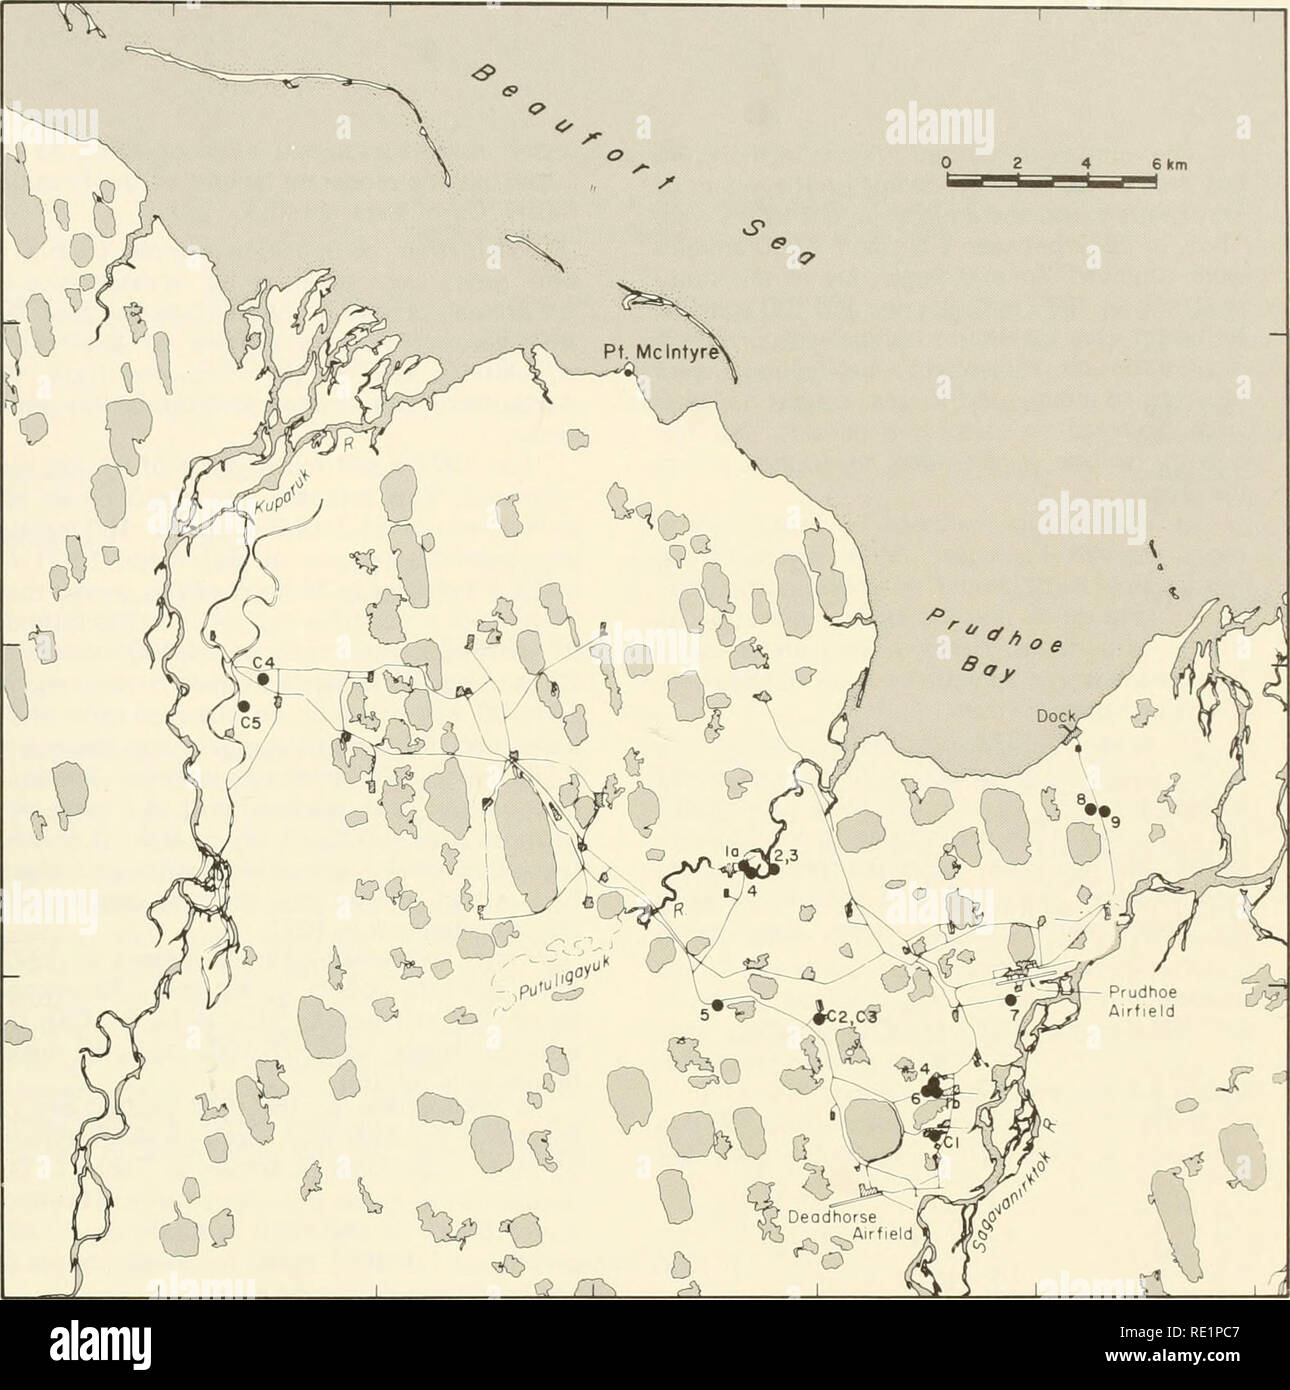 . Ecological investigations of the tundra biome in the Prudhoe Bay region, Alaska. Tundra ecology. 155. 70° 30' 70°25' 70°20 70°I5' I48°40 I48°20 Designation on Designation on Site no. Description vegetation map Site no. 5 Description Dupontia fisheri brook meadow vegetation map la Location of reindeer corral 1972 Pf3;-:4 Si2^F3,4 lb Location of reindeer corral 1972 L3-L4 (Table 8, Table 12, Appendix 2,3 Dryas heath and Salix rotundi- Fl-F3.Fw9 Table 3) folia snowbed communities 6,7 Lake vegetation — Carex marsh L6-L13or (Table 8, Table 12, Appendix (Table 8, Table 12) F^5,3 Table 2) 8 Sand du Stock Photo